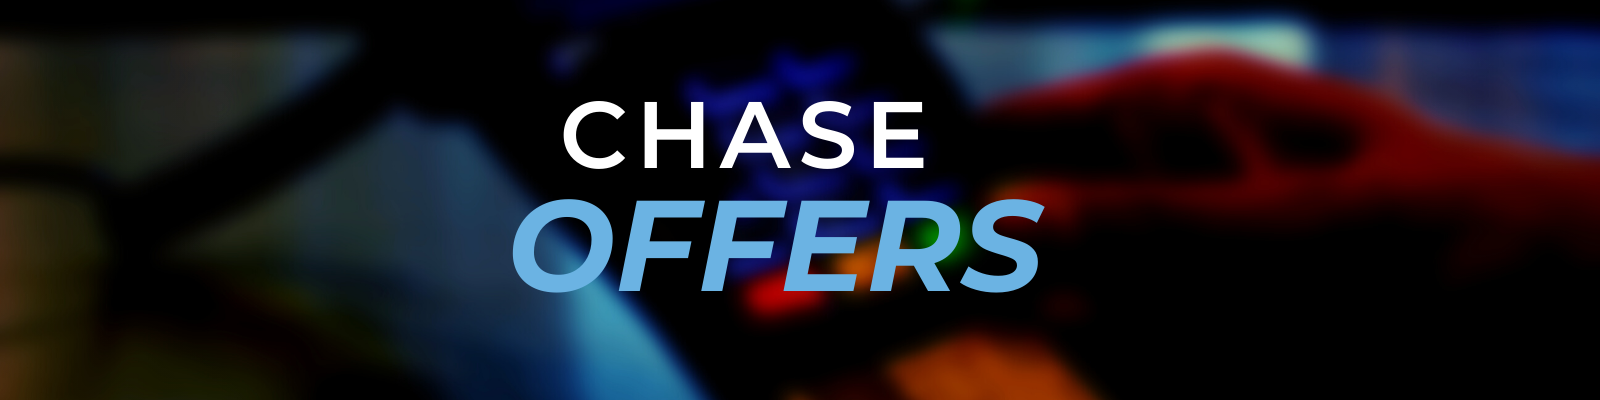 Save Up to $33 at Best Buy with New Chase Offer